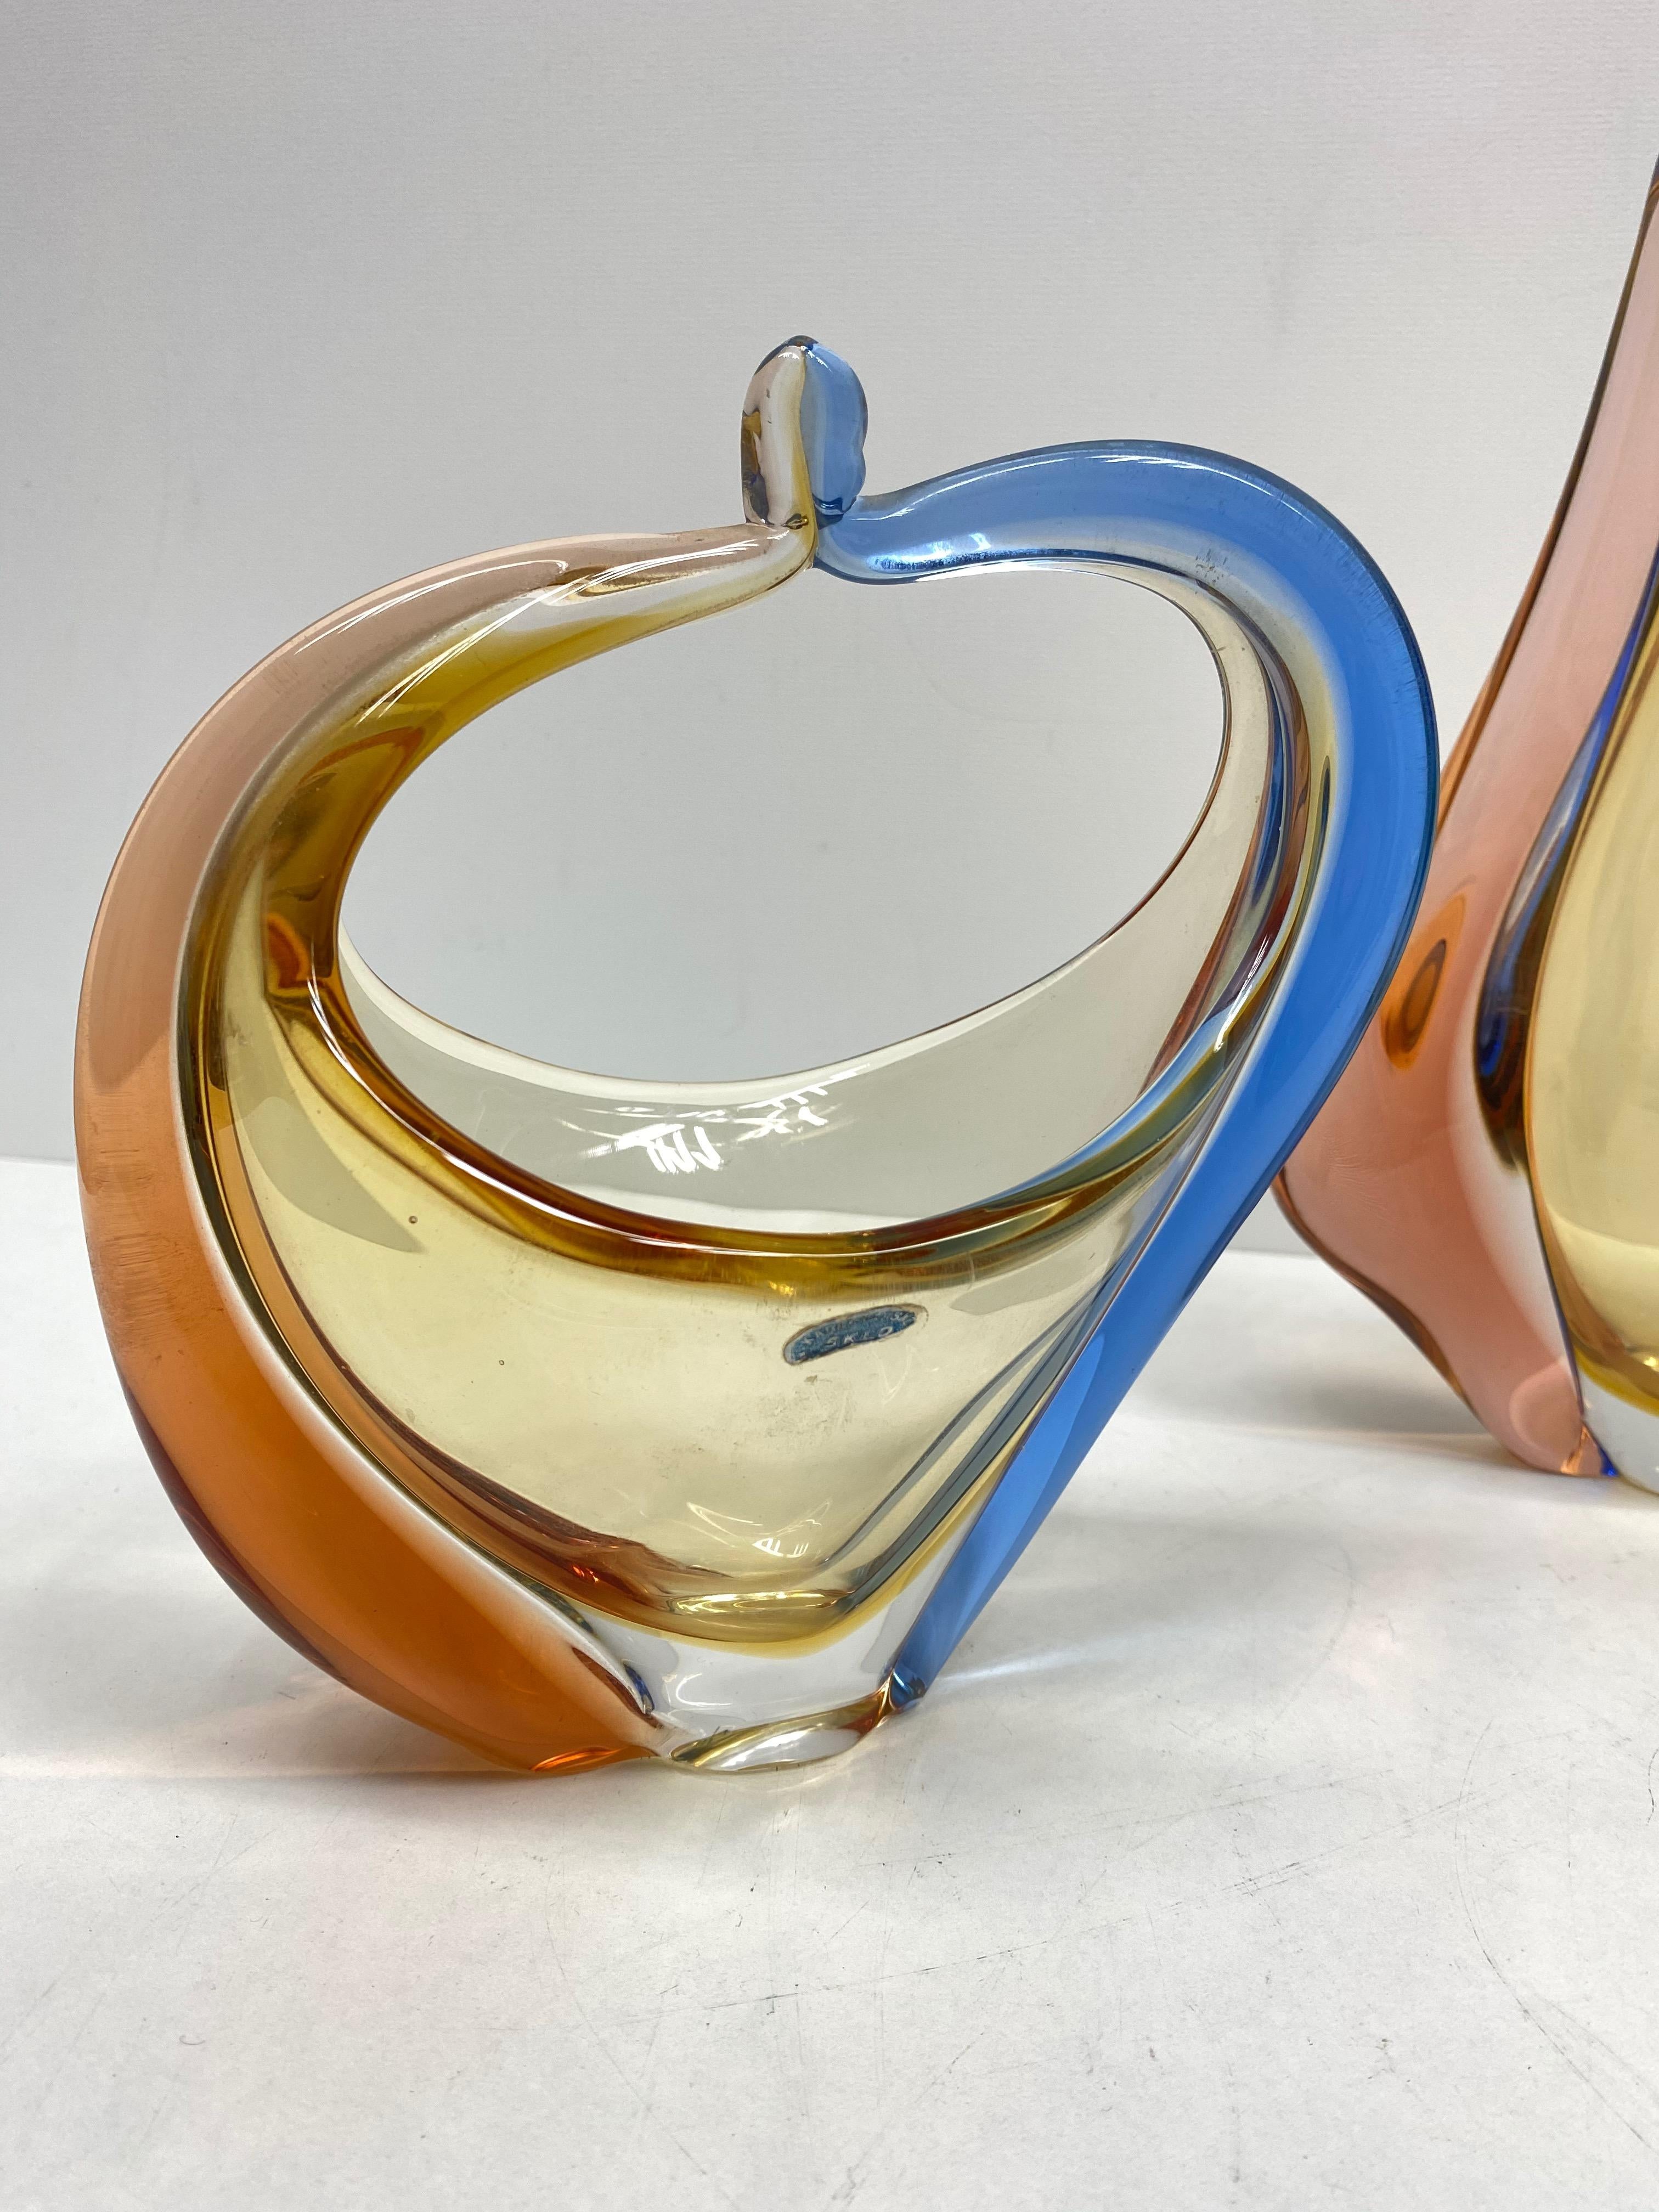 An amazing art glass bowl, basket object and a vase, in an unusual design and a pretty beautiful blue, amber and brown color. Three highly decorative pieces useful as centre pieces. Bohemian Czech glass by Hana Machovska Romana for Sklo Mstisov